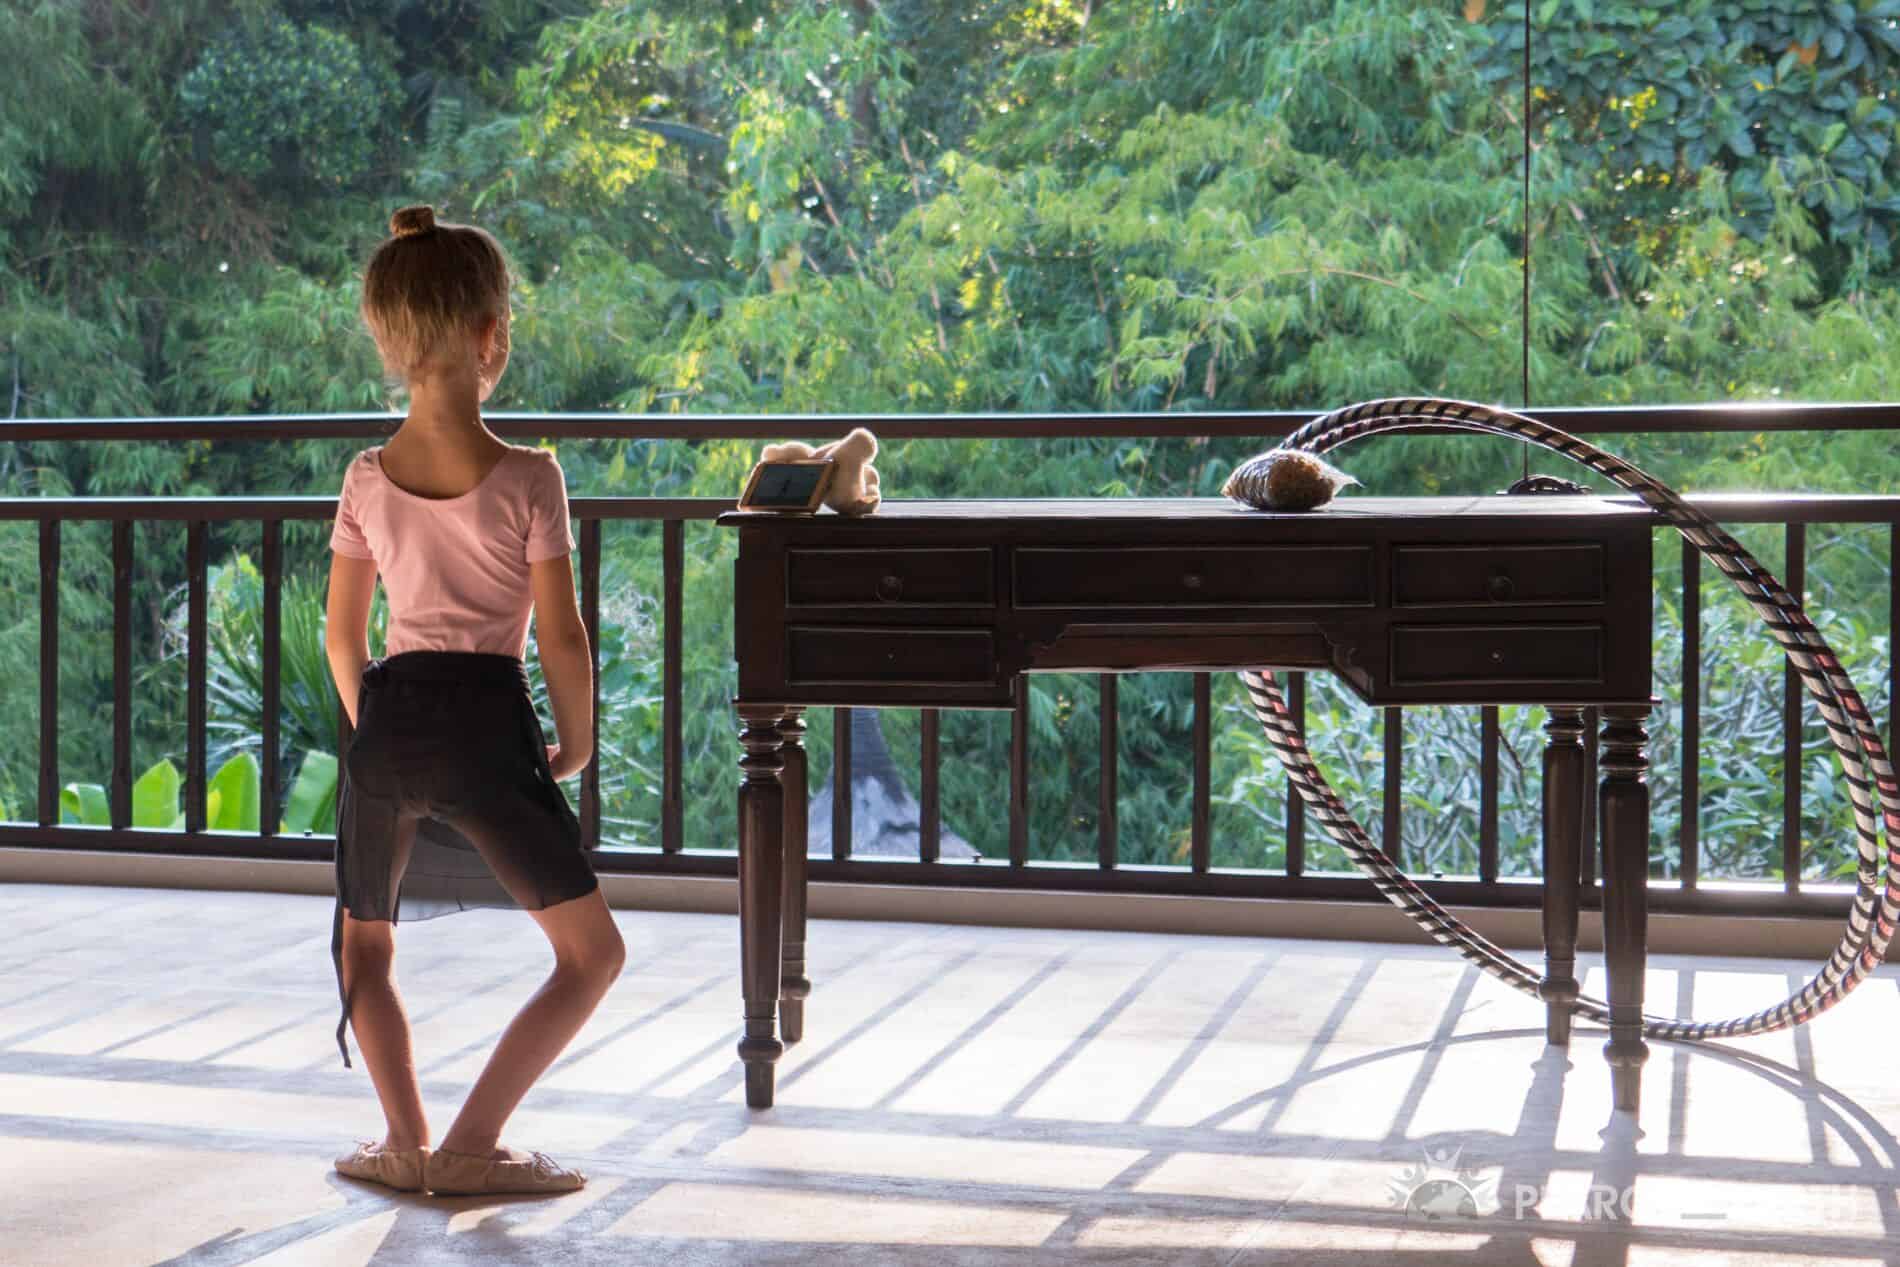 Creative activities like dance and ballet are possible when worldschooling your kids